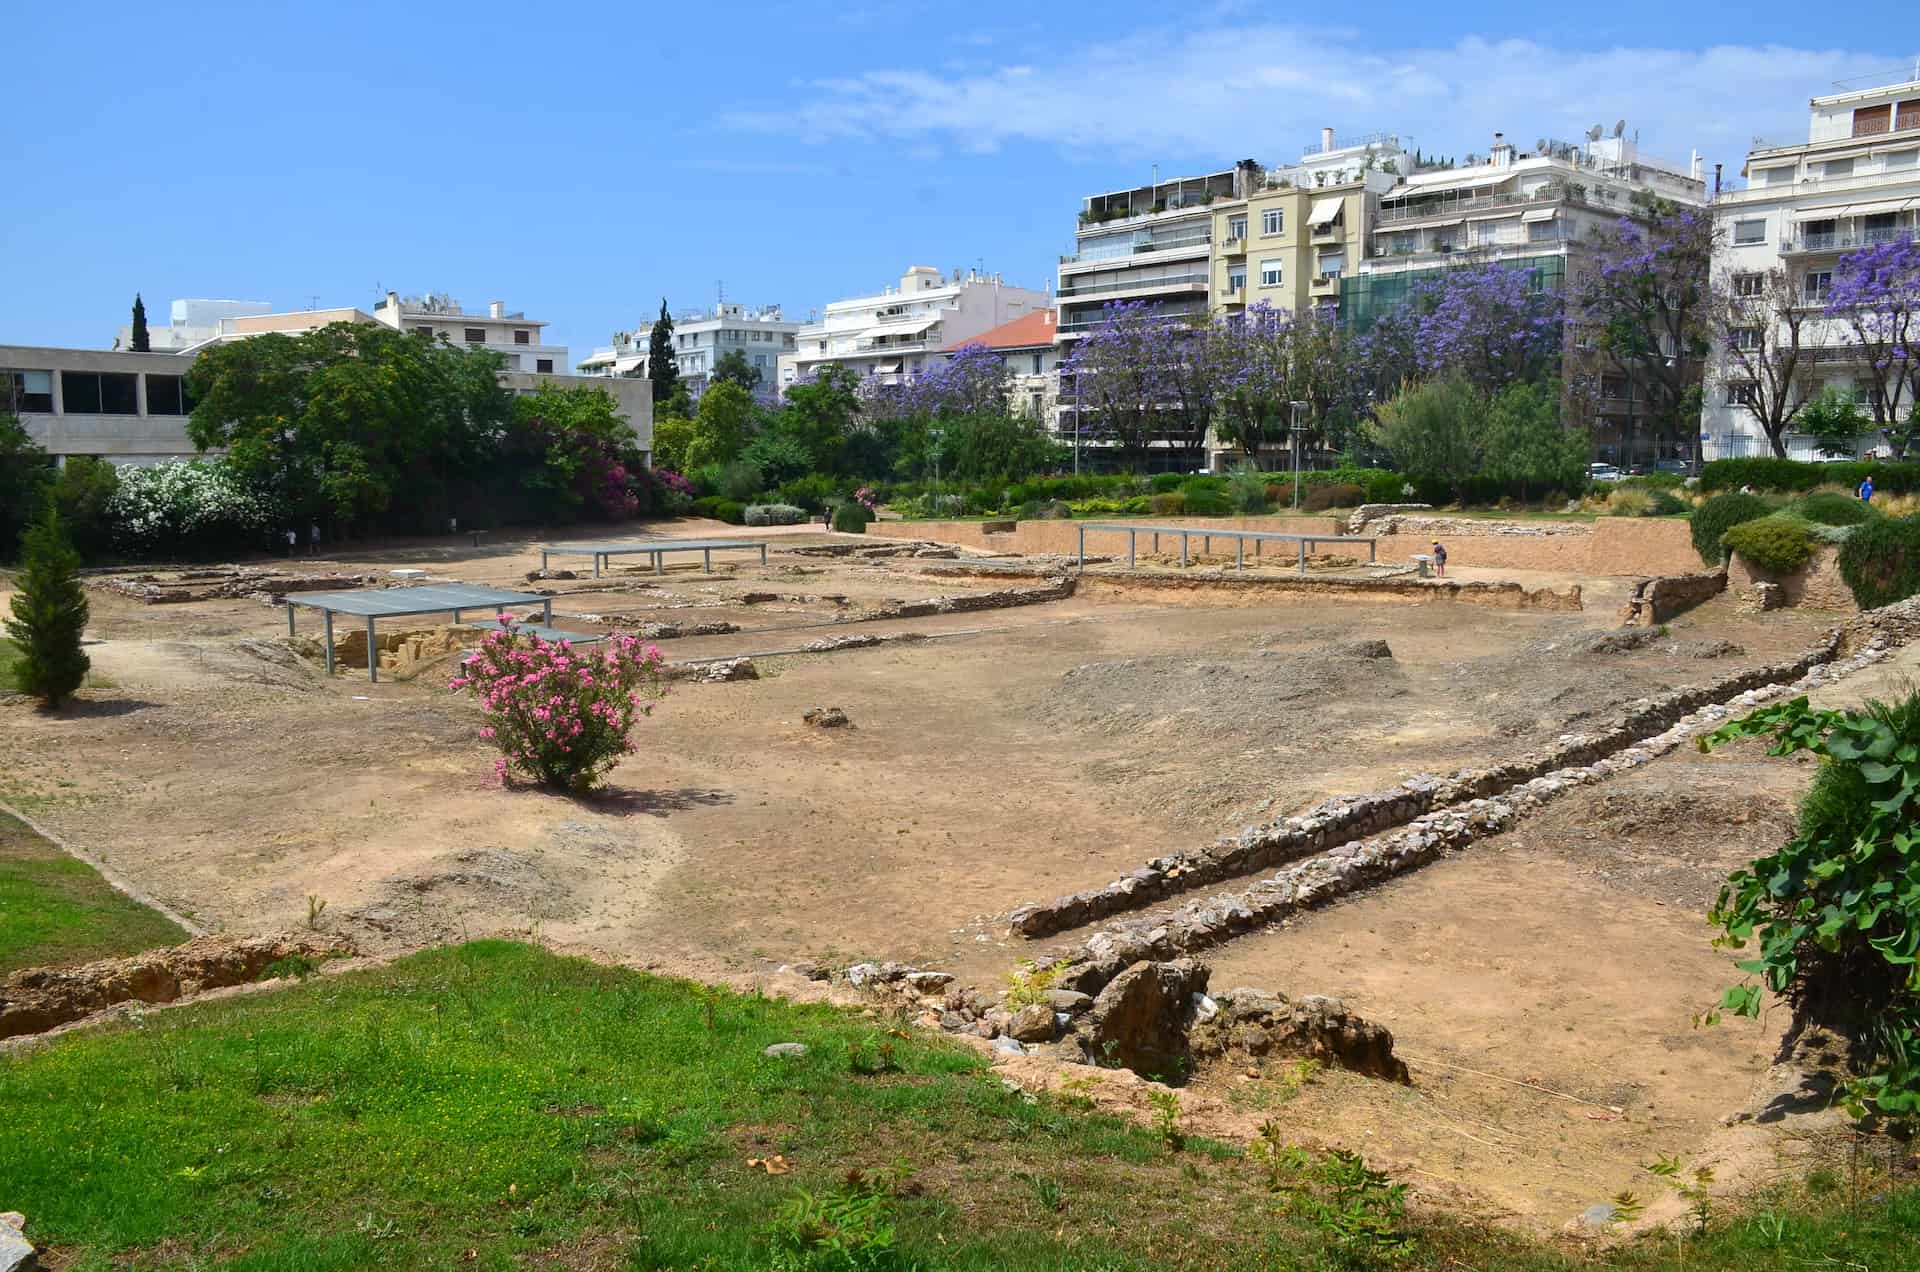 Lyceum in Athens, Greece